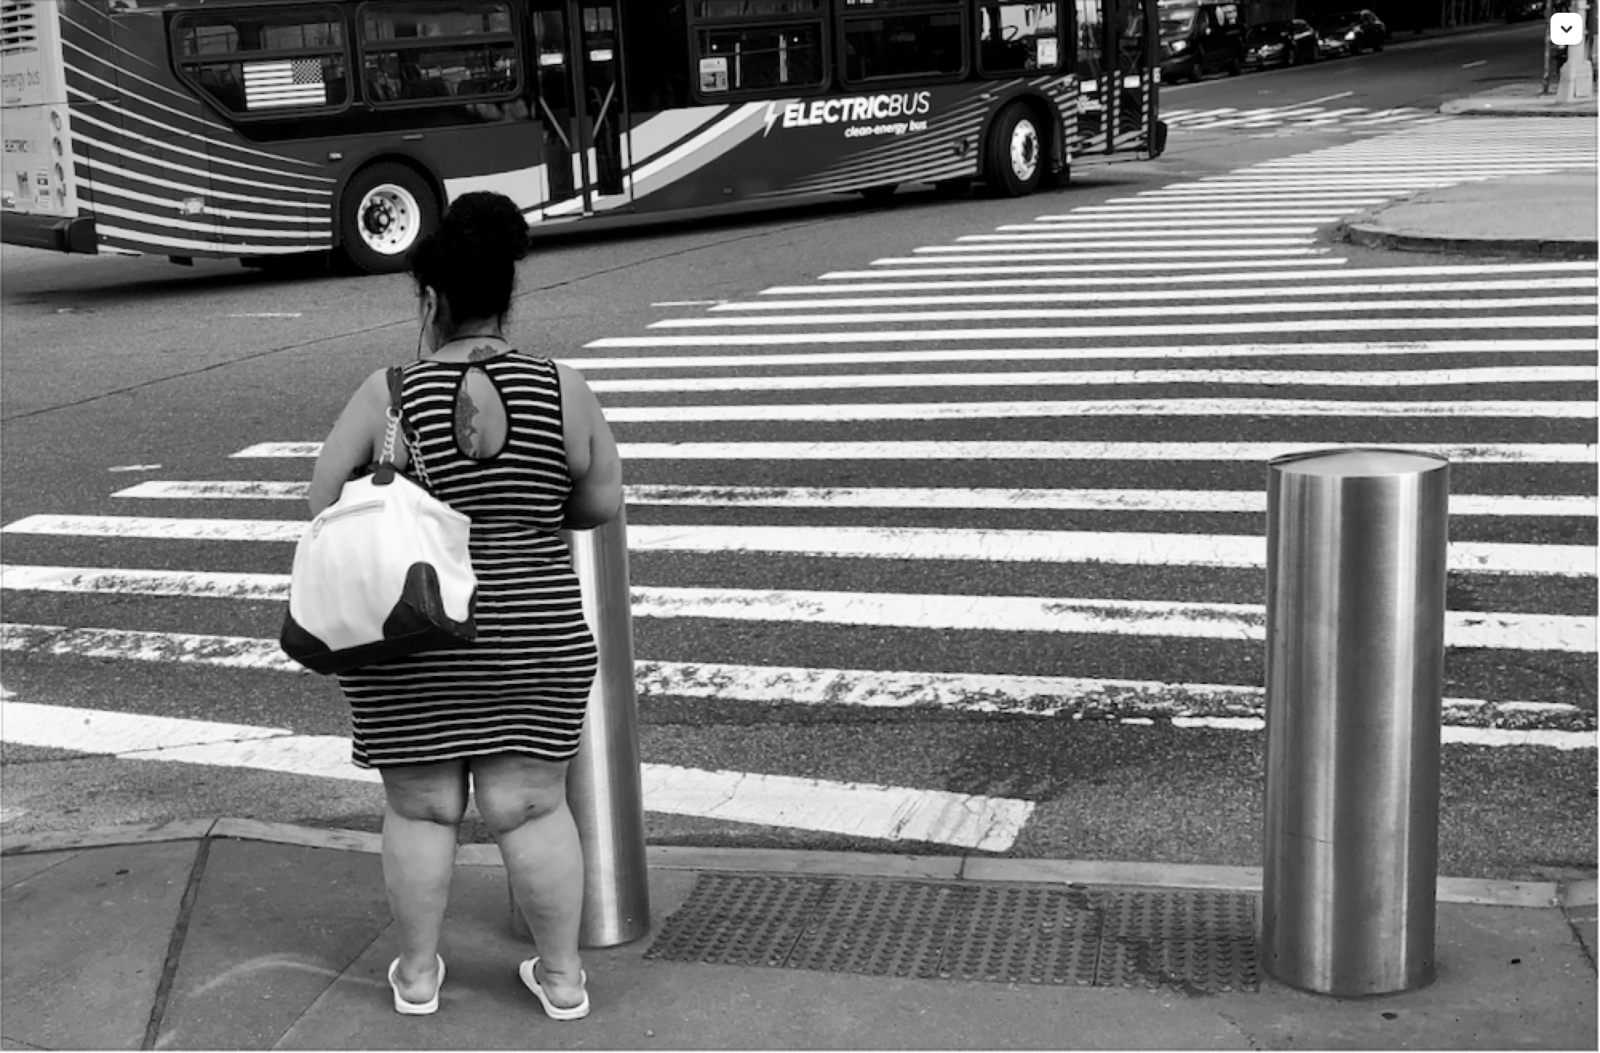 A black and white photograph of a woman seen from behind in a striped dress standing on a streetcorner by a sidewalk. A bus parked on the other side of the street also sports stripes.